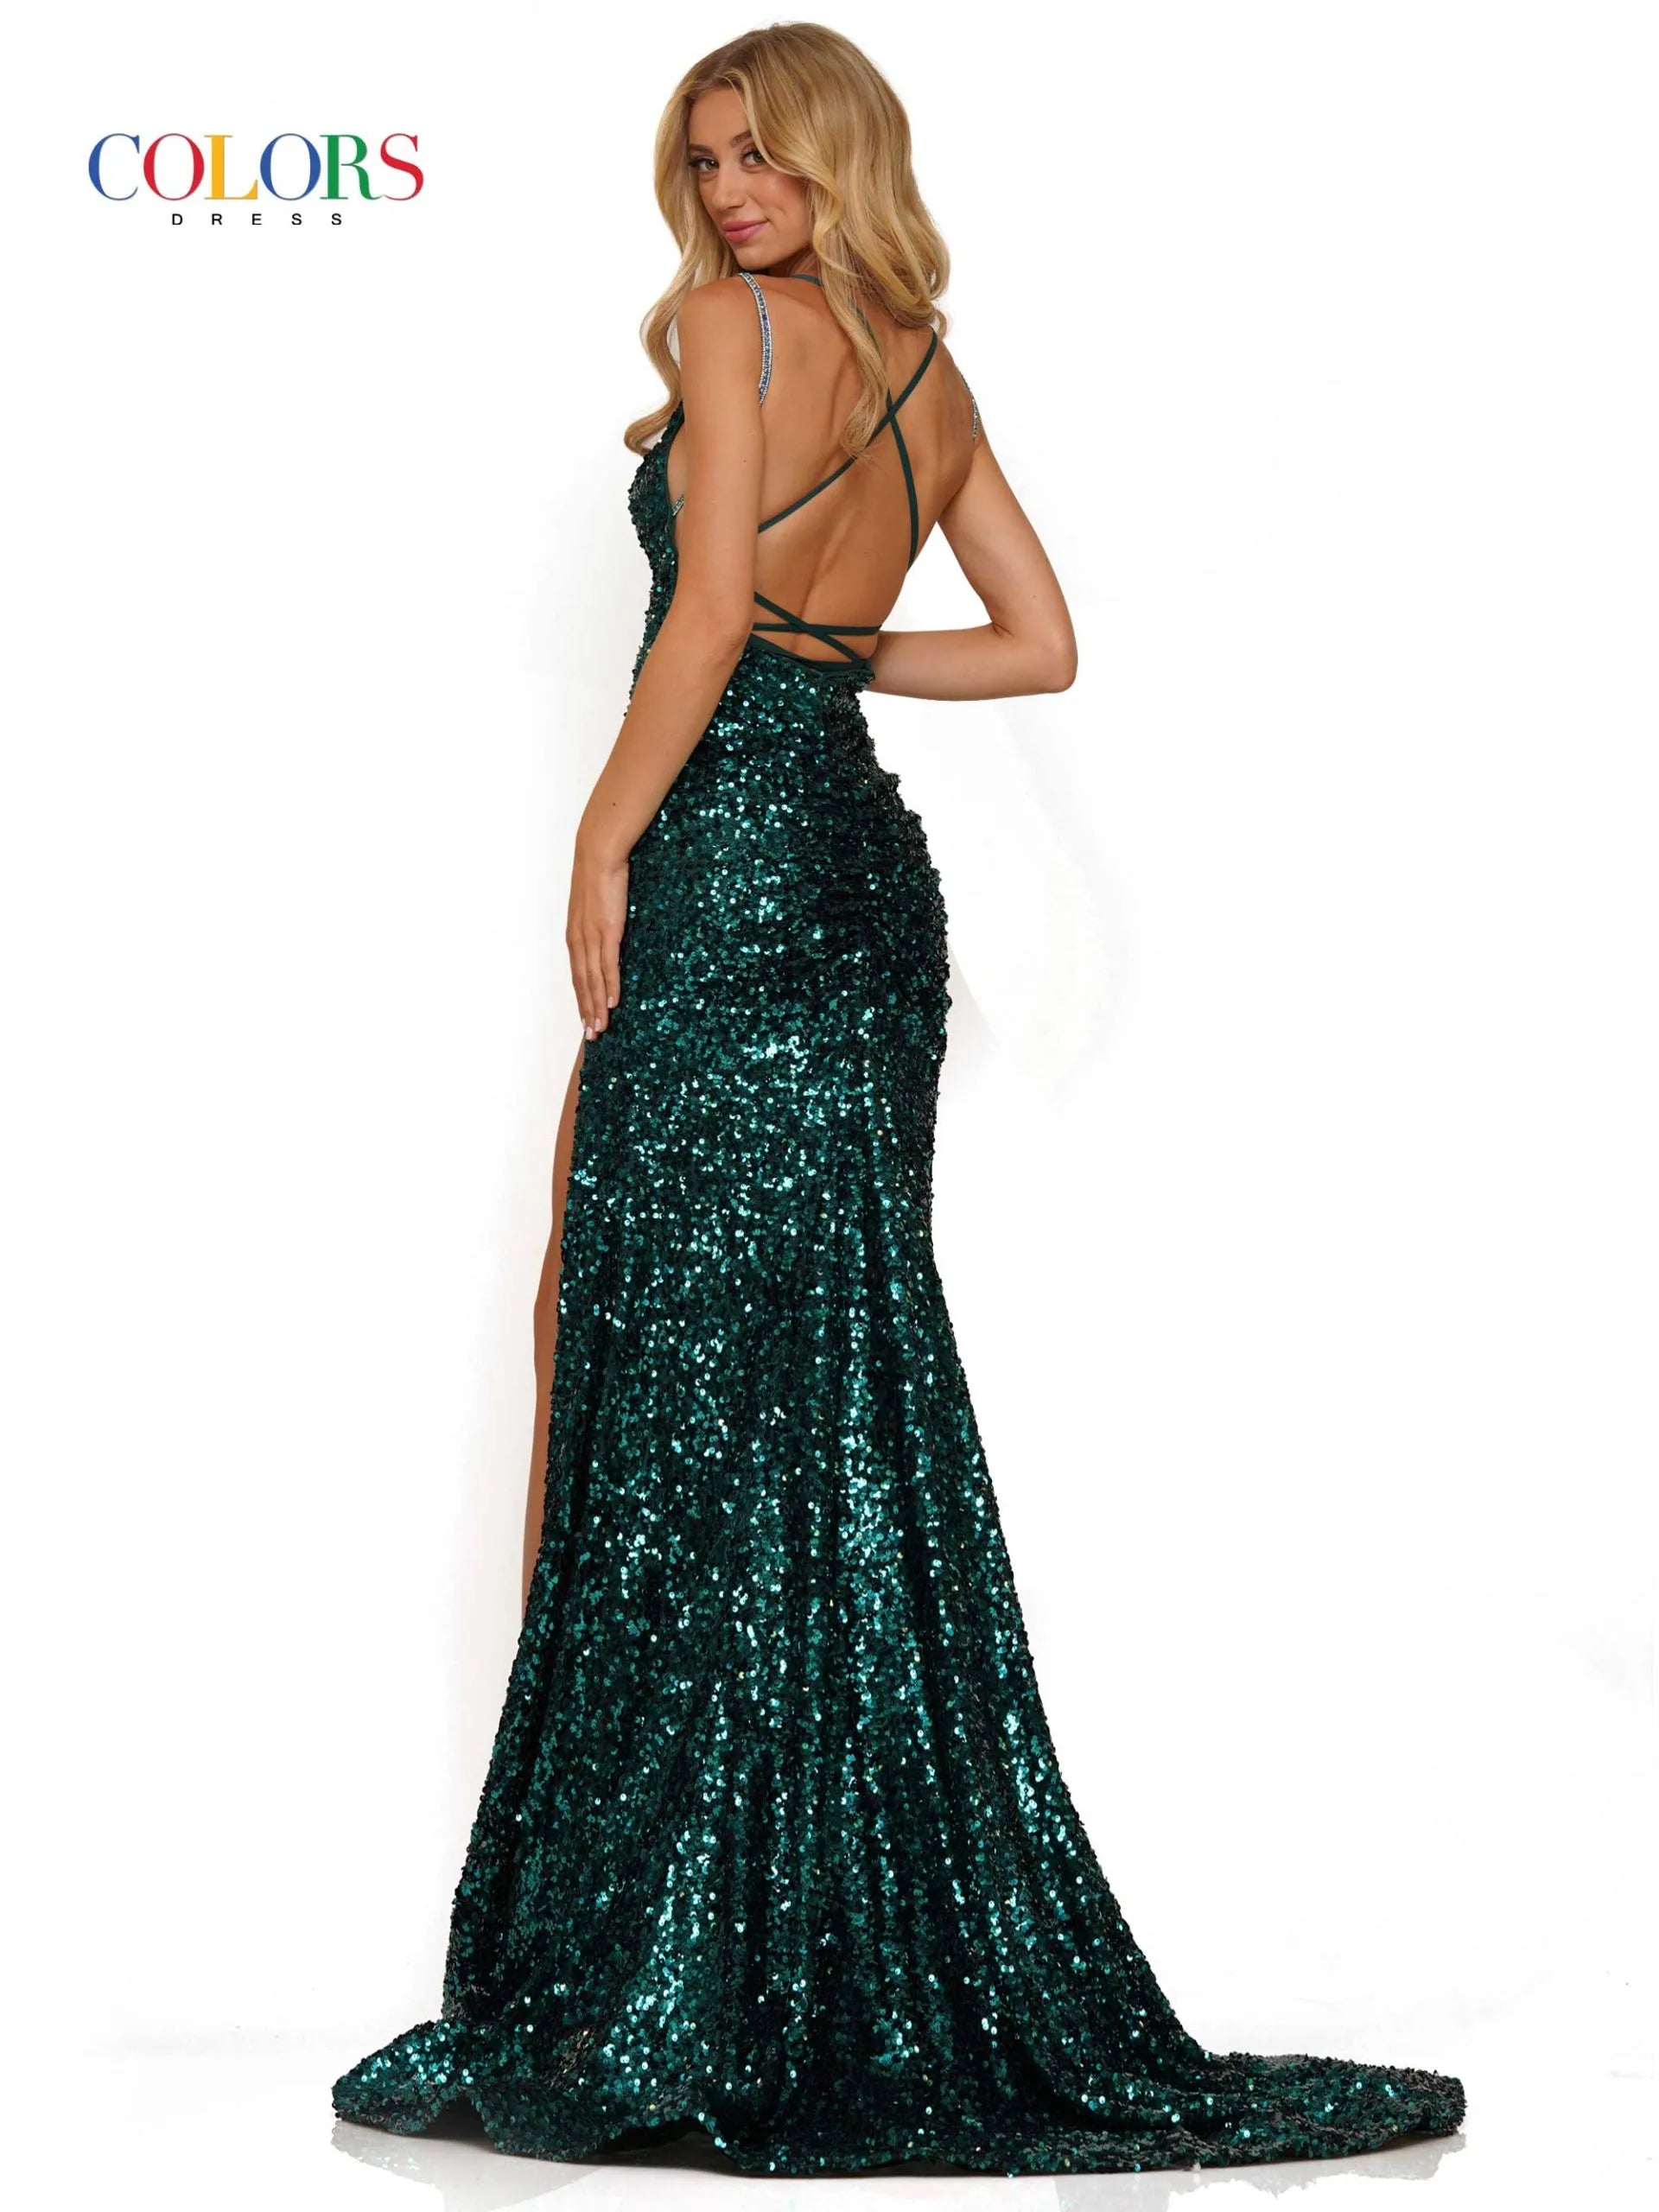 This Colors Dress 2975 long prom dress showcases a fitted design, accented with sparkling sequins and thin spaghetti straps. The dress features a high slit, offering a glamorous touch to your formal pageant look. Stand out from the crowd with this elegant and eye-catching gown.